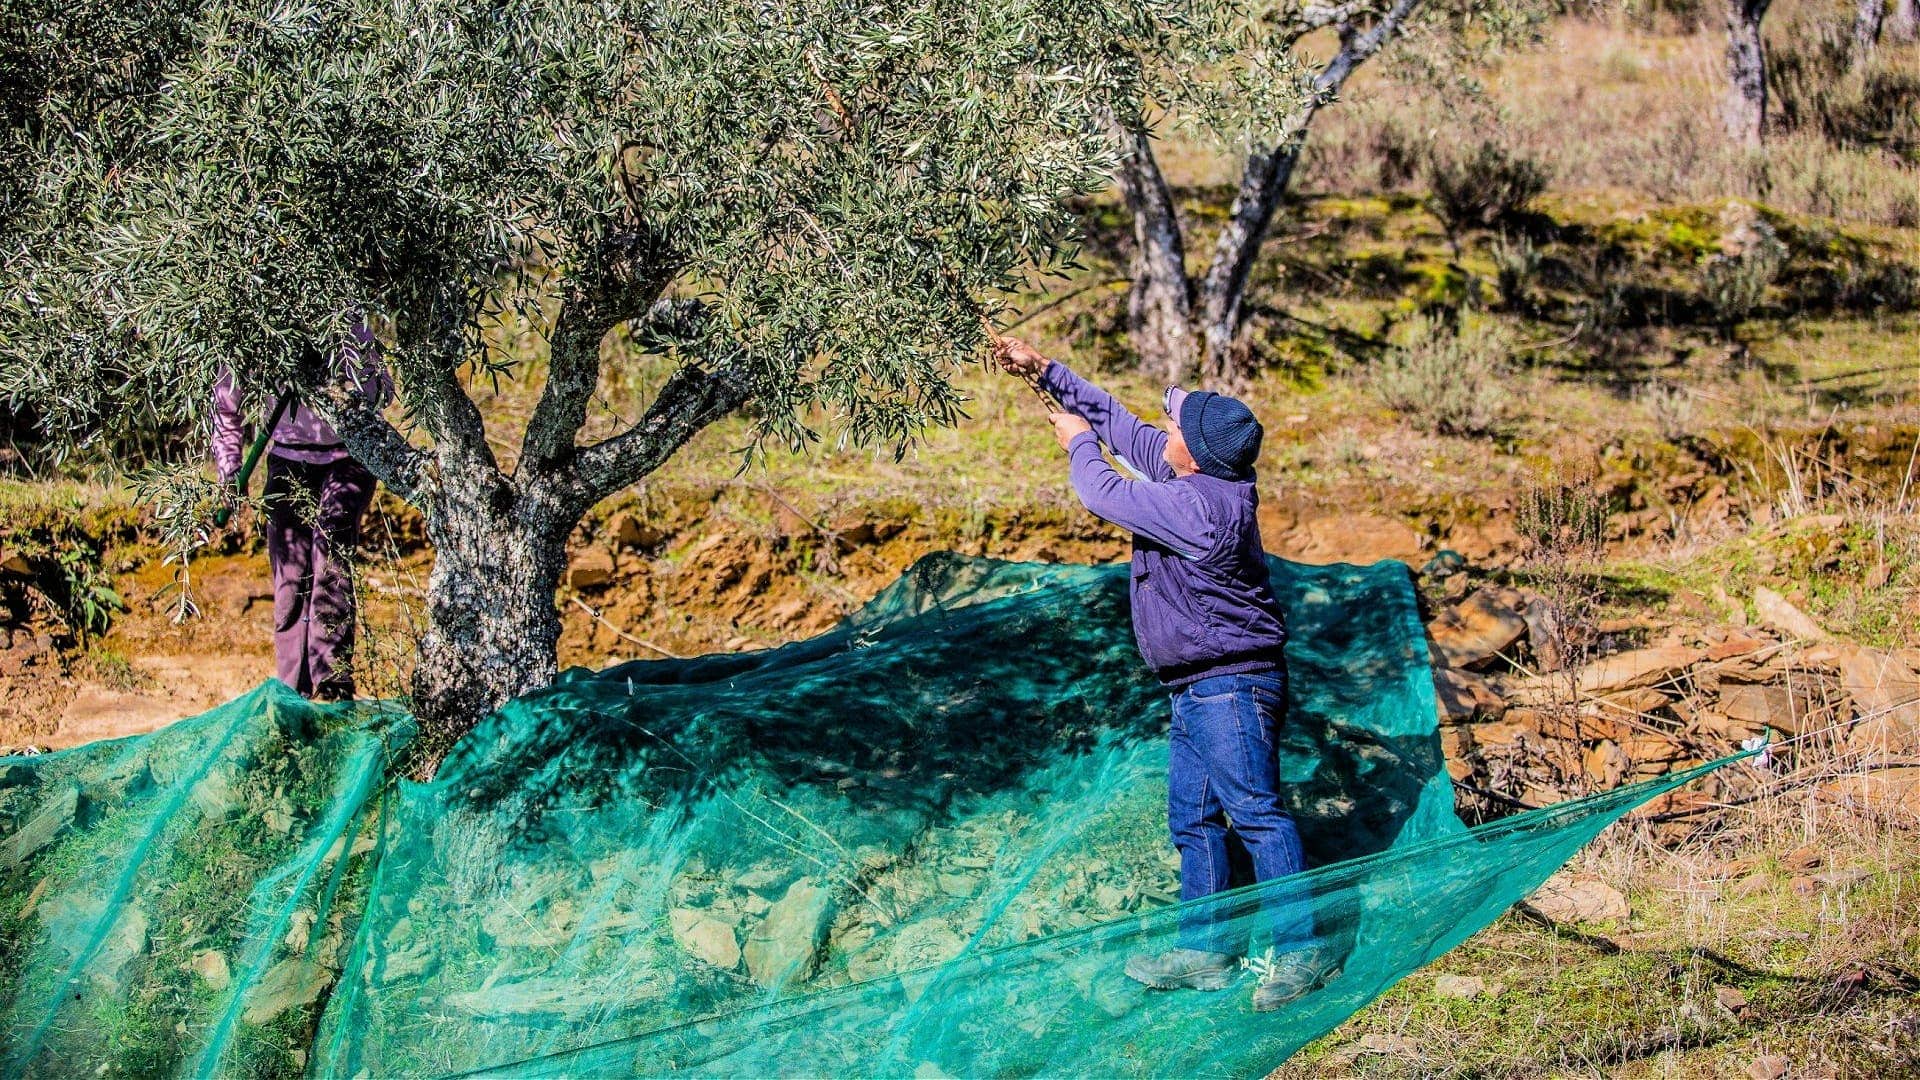 business-europe-production-olive-oil-production-in-portugal-set-to-slump-after-record-year-olive-oil-times